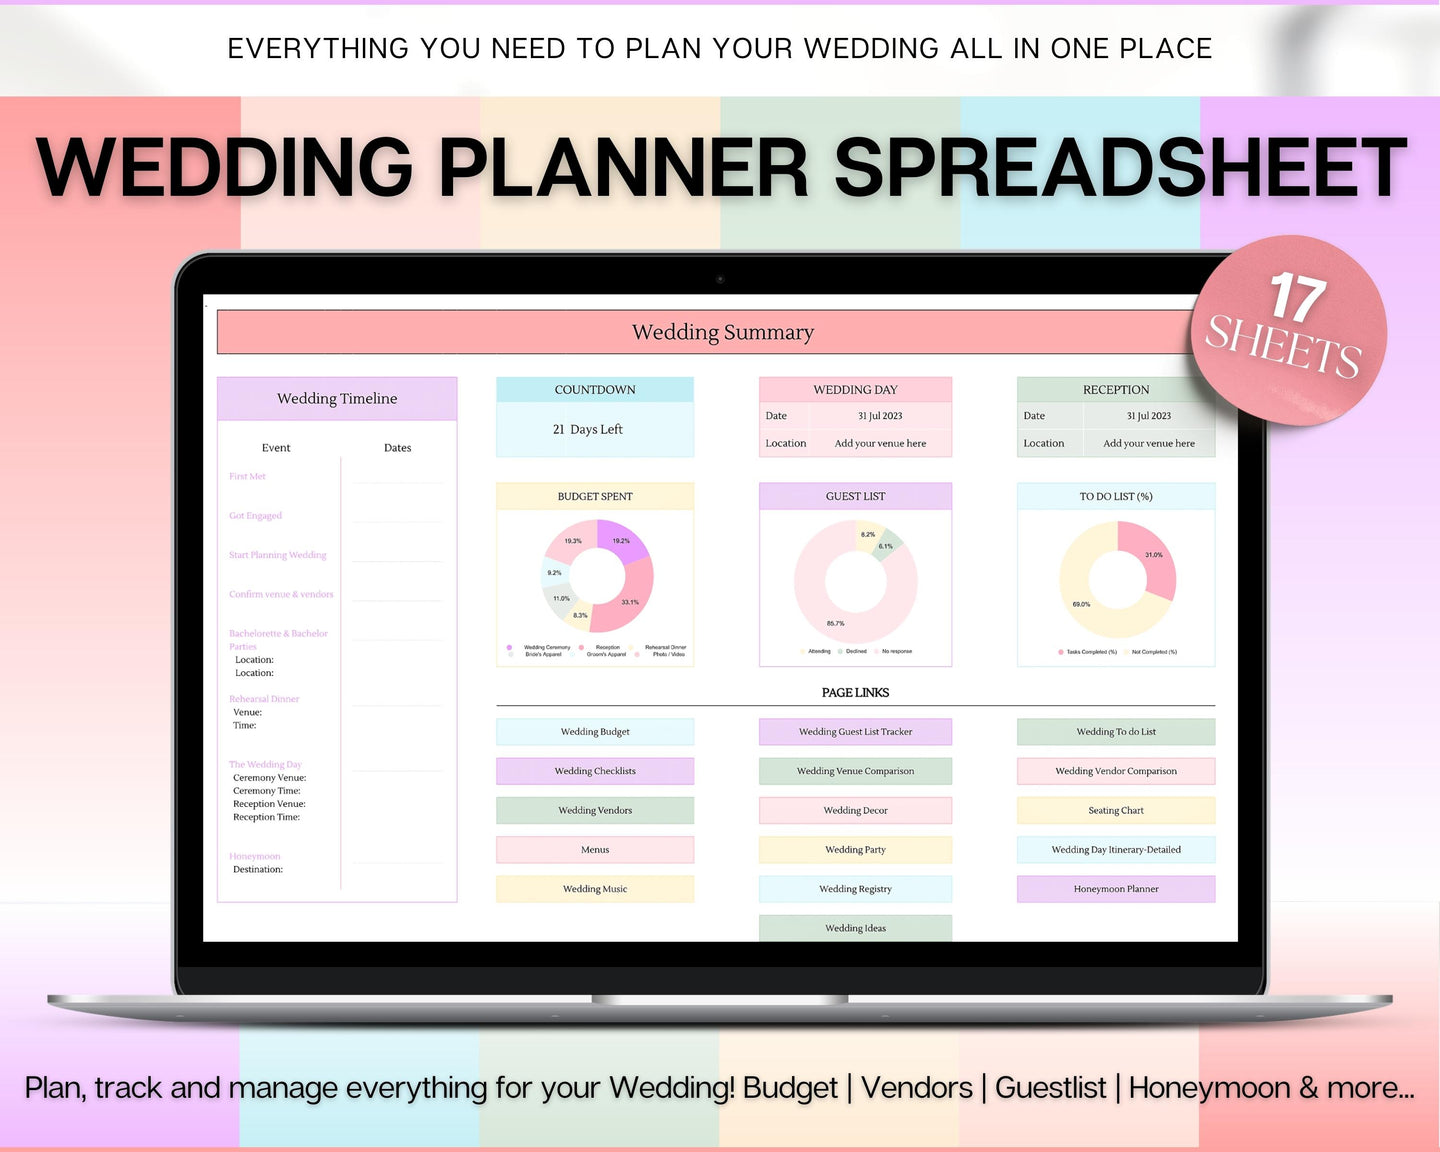 Wedding Planner Spreadsheet | Google Sheets Wedding Budget, Checklist and Schedule for Brides and Grooms | Rainbow